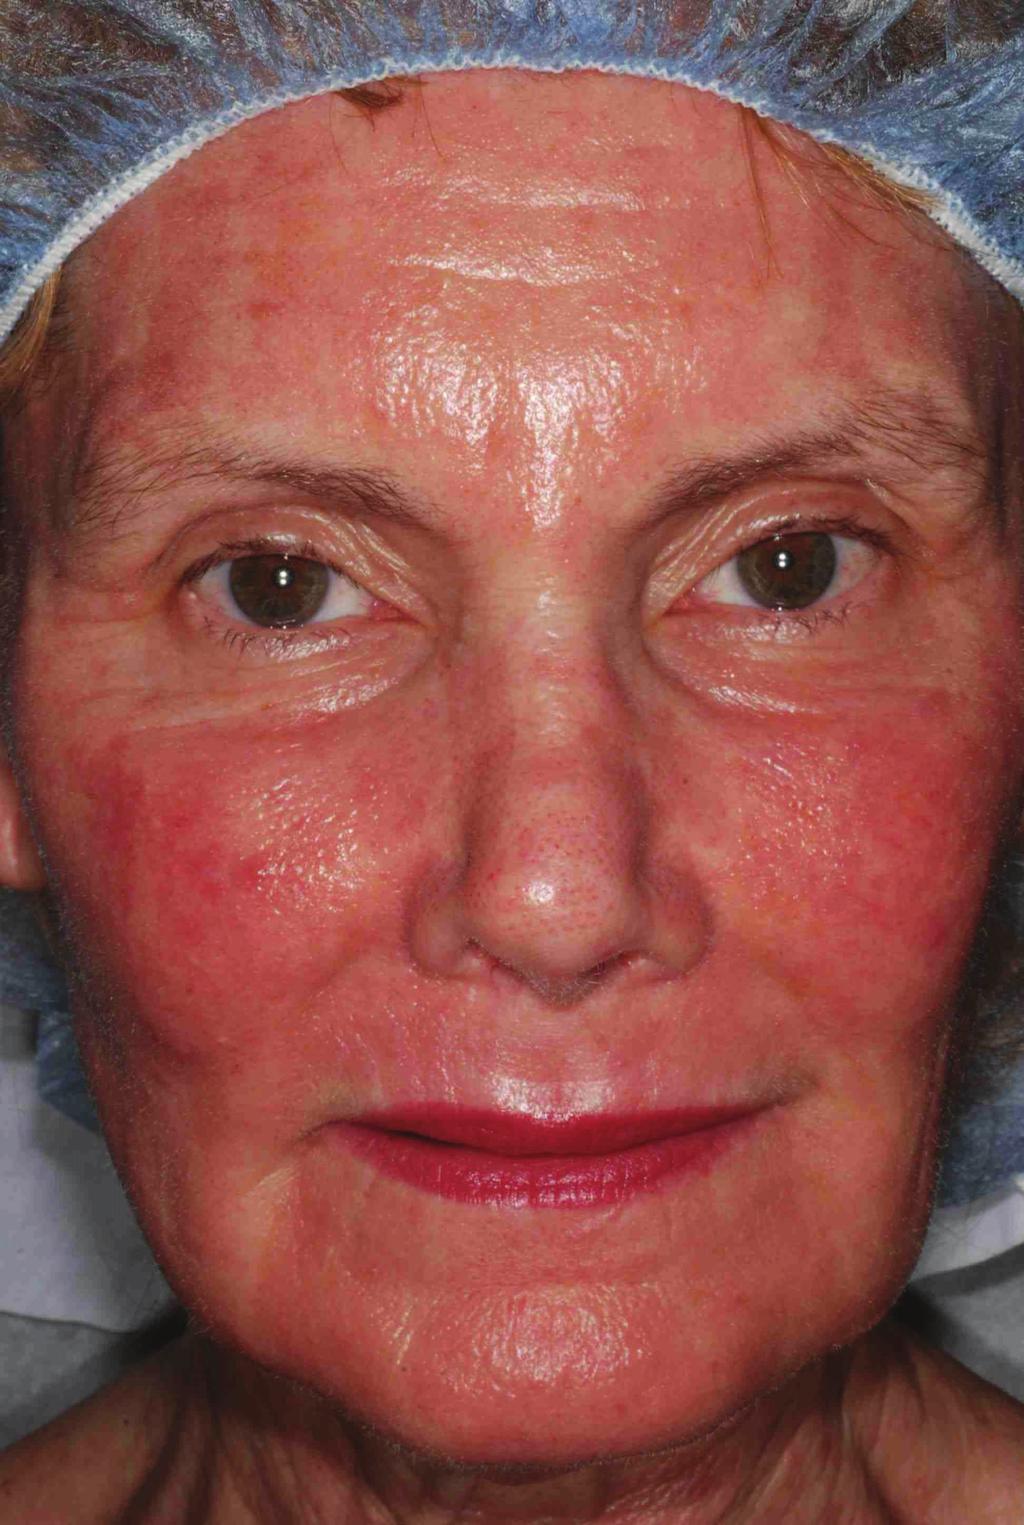 after an entire face treatment with 160 mj laser pulses: (a)